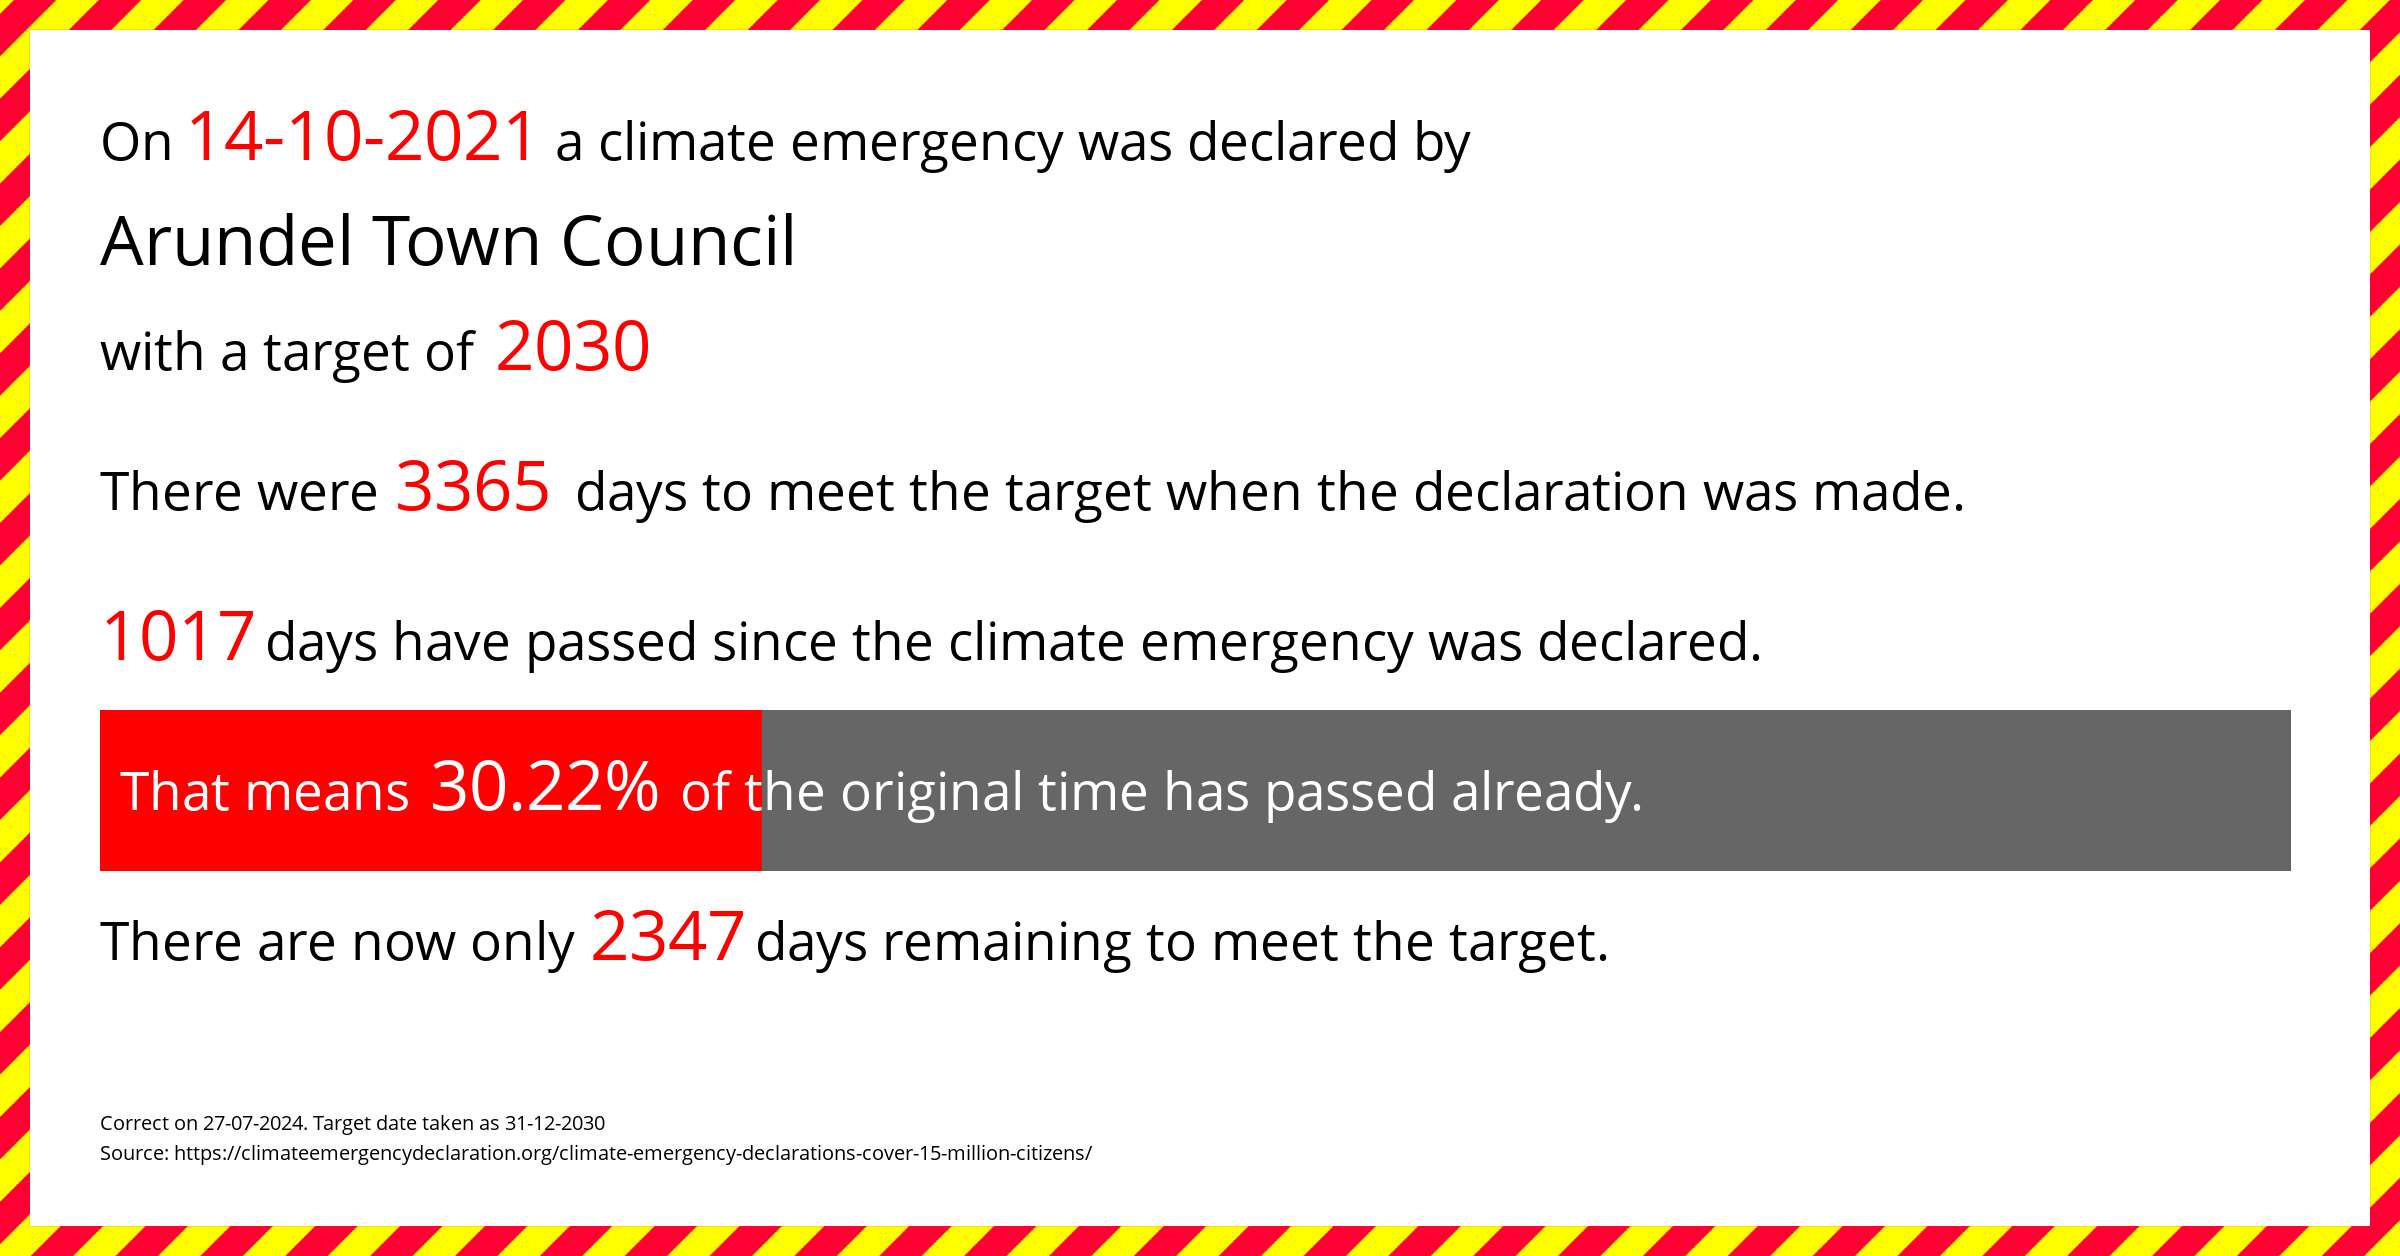 Arundel Town Council  declared a Climate emergency on Thursday 14th October 2021, with a target of 2030.